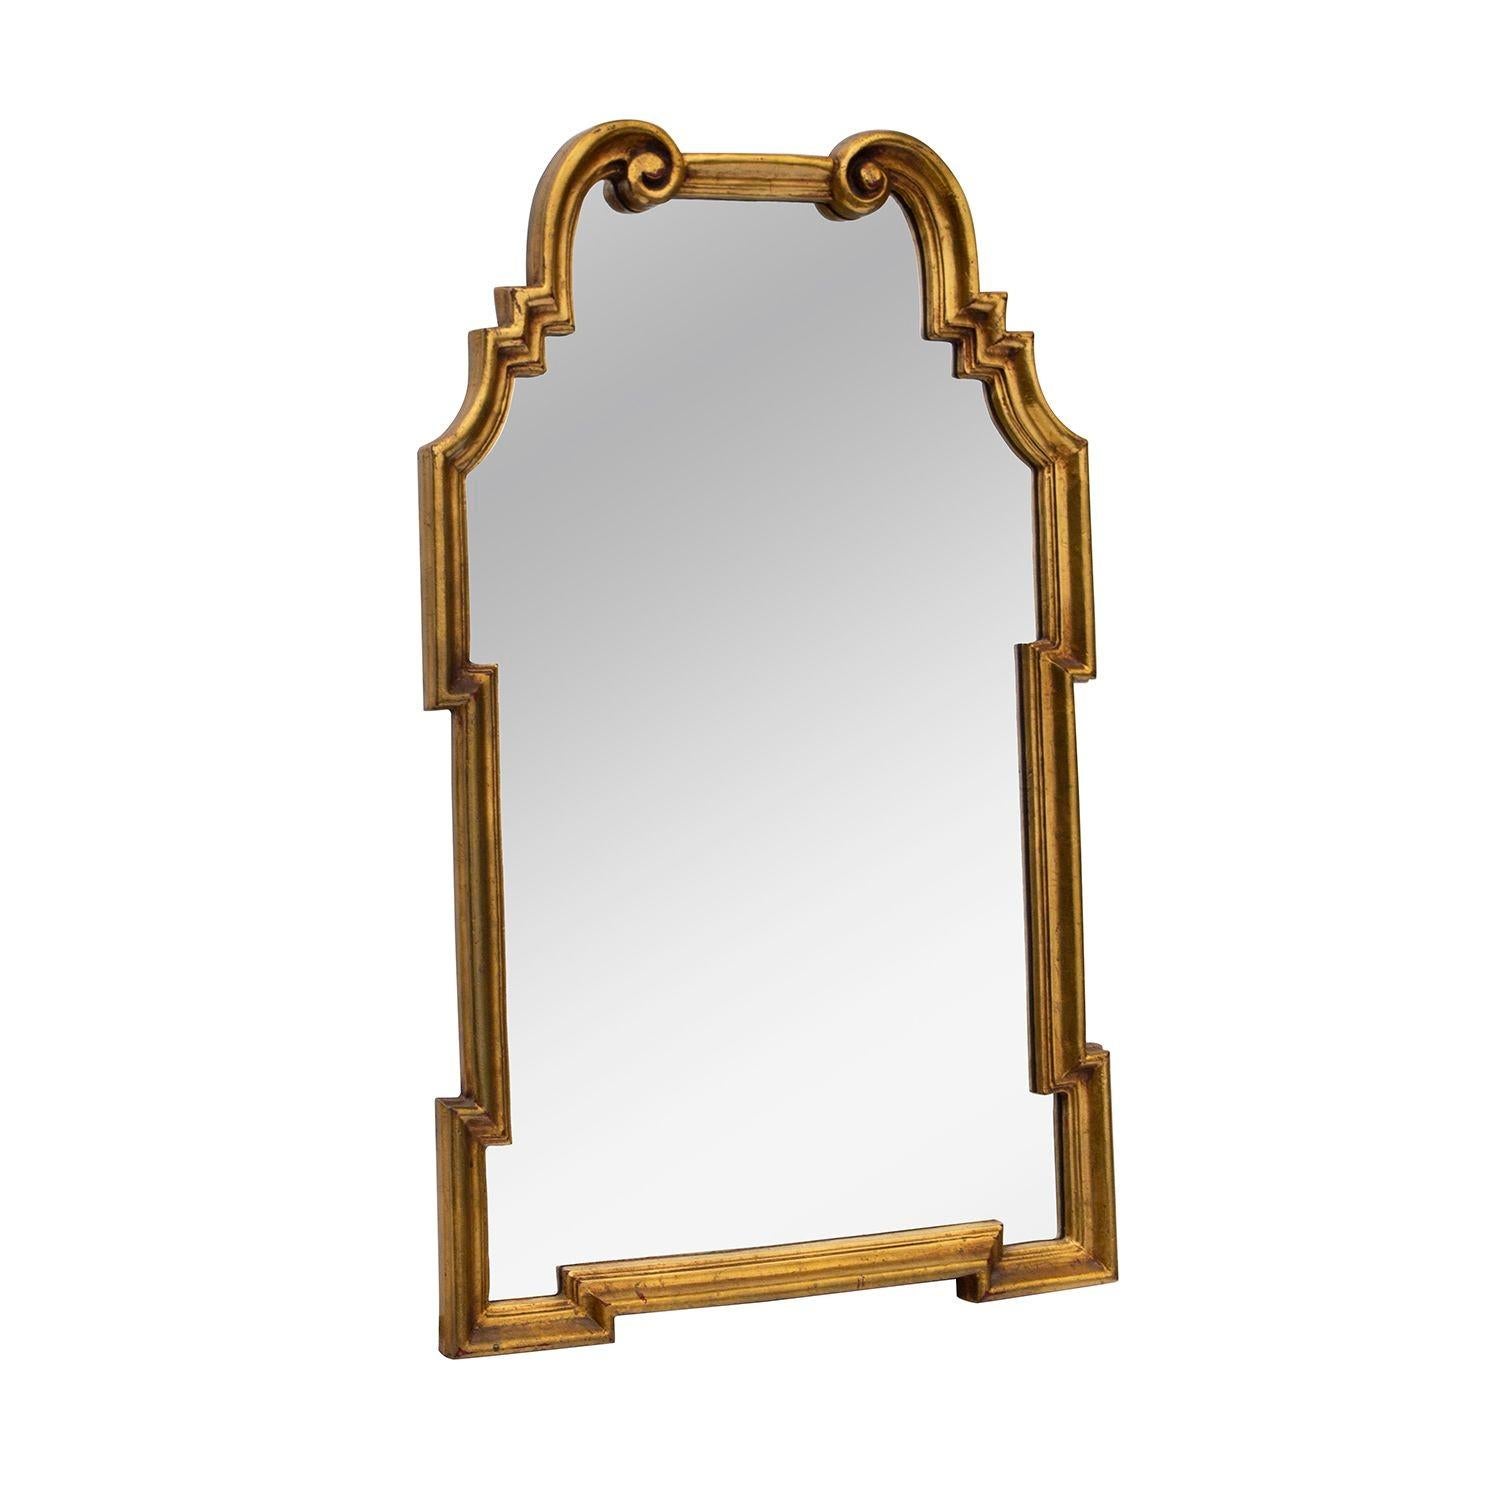 Italy, 1970s.
Hollywood Regency vertical gilded mirror made in Italy for La Barge. This classic mirror has an arched frame with scrolled pediment and contrasting geometric-form sides. Would look great in a powder room, especially over wallpaper.